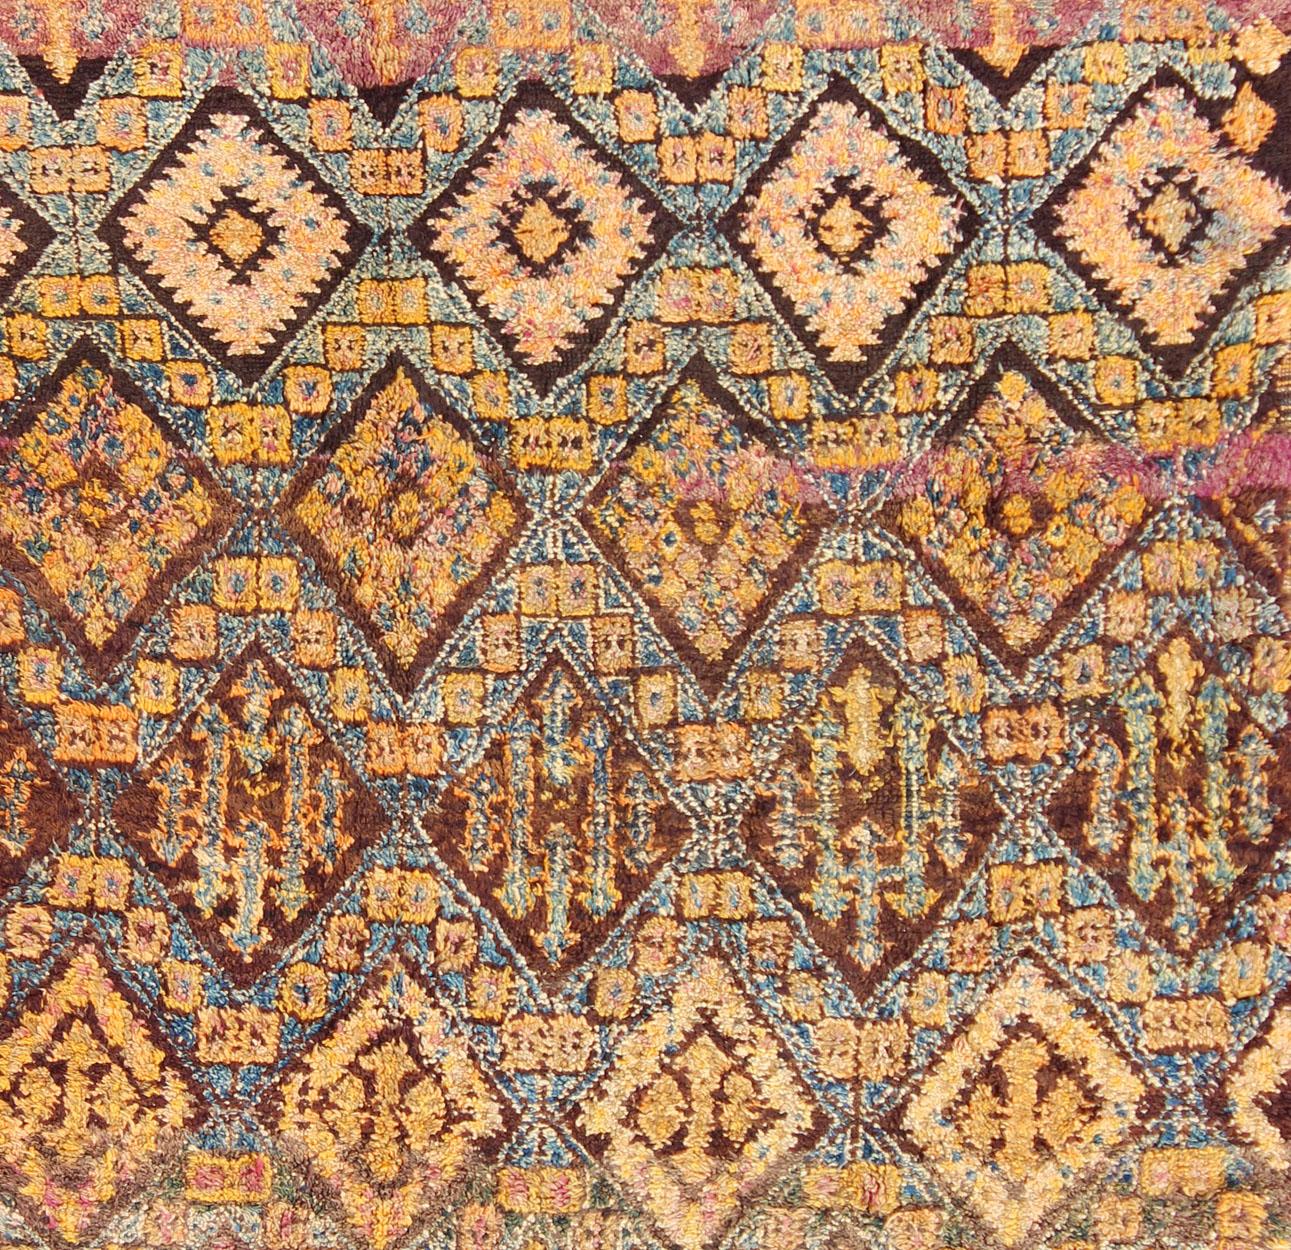 Hand-Knotted Vintage Square Moroccan Beni Ouarain In Earthy Tones With Pops of Blue and Gold For Sale